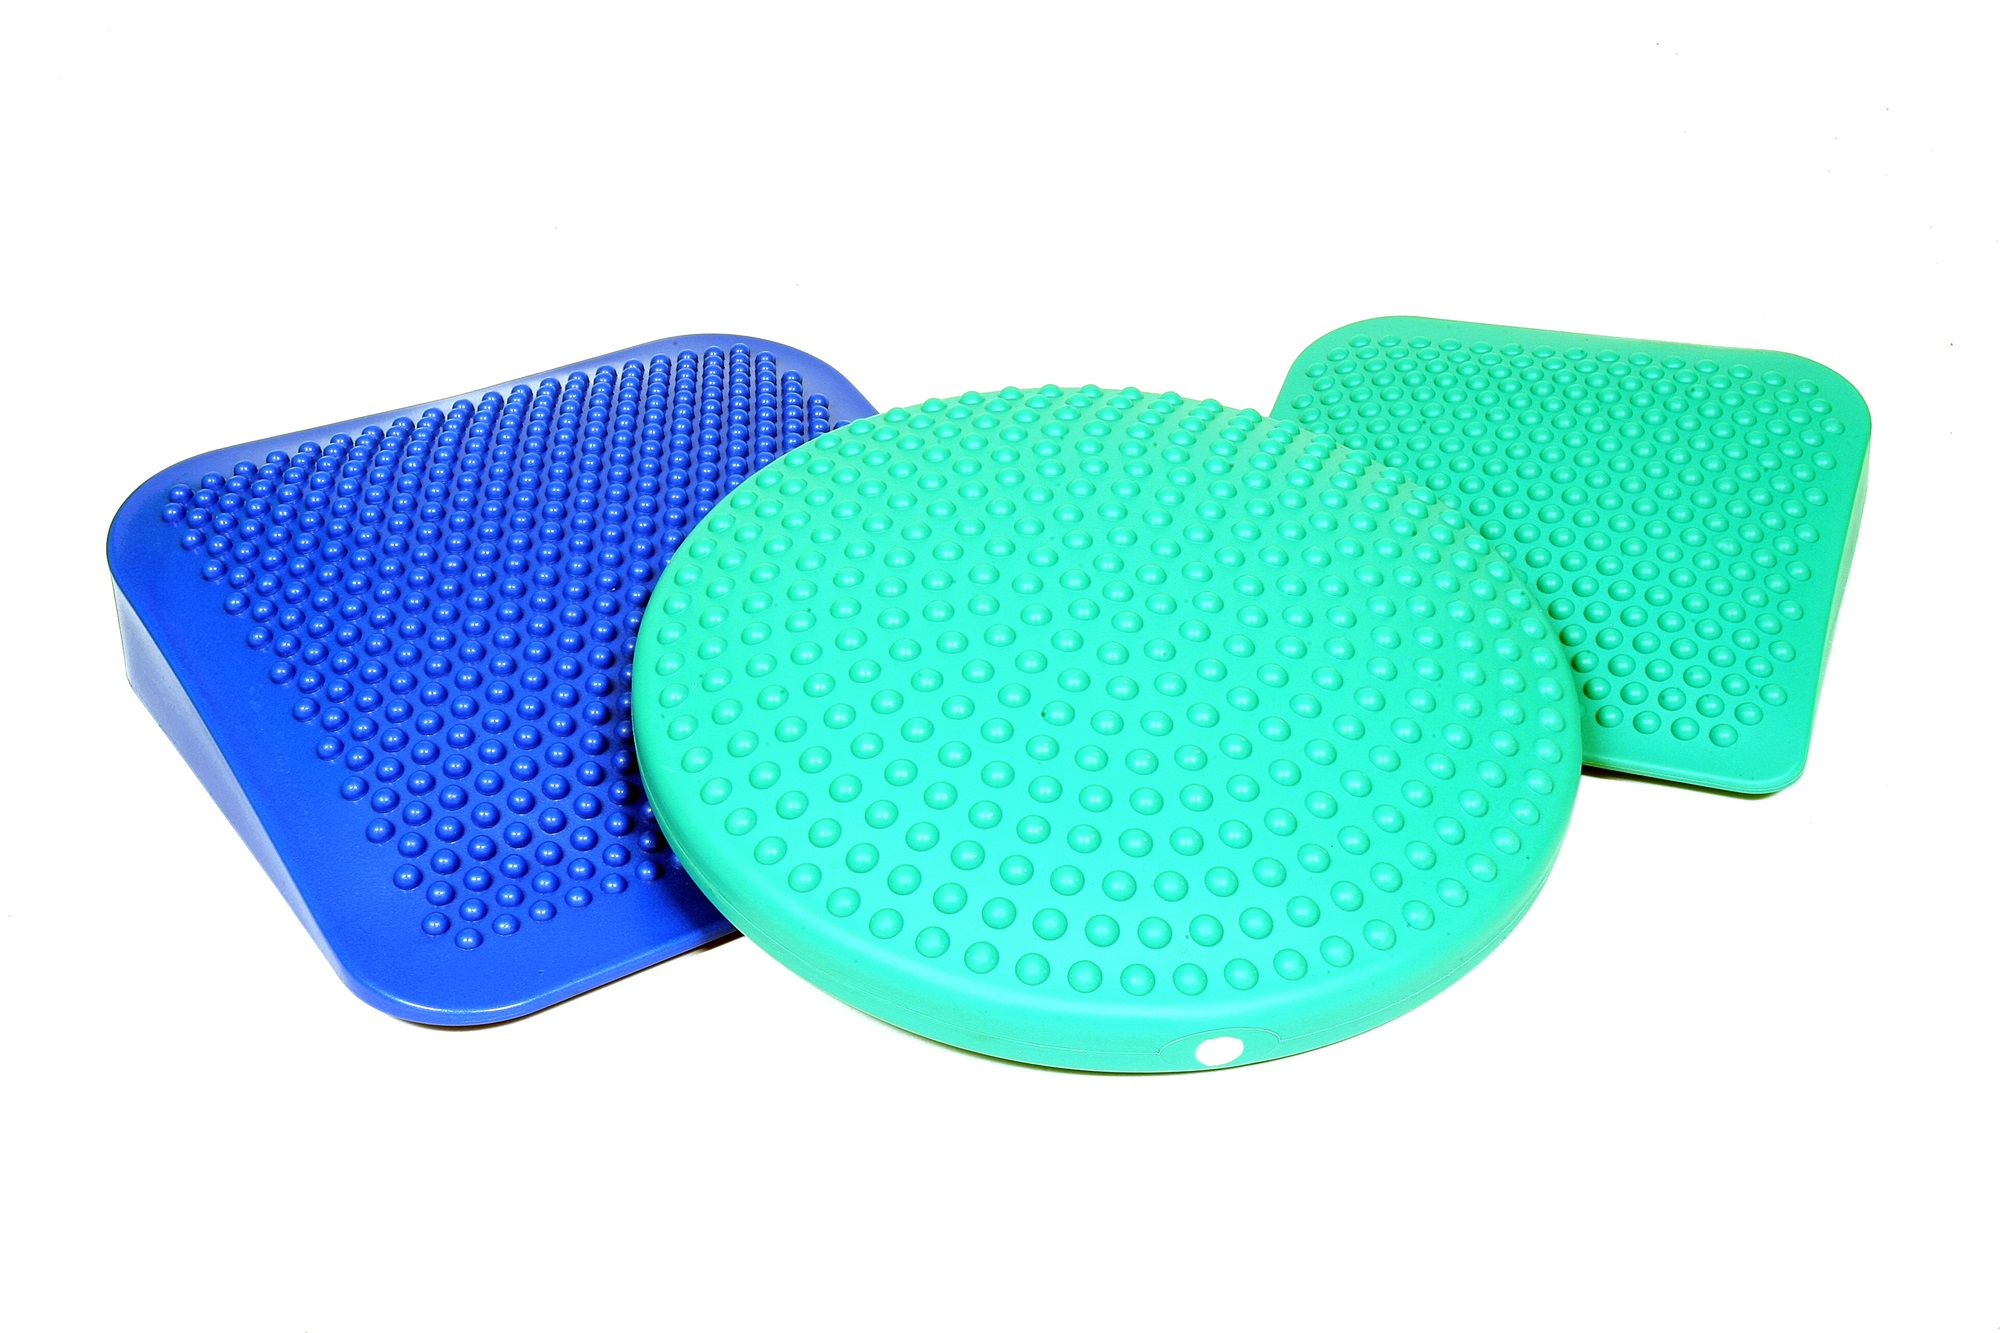 Special Needs Therapy Seat Cushion | Lean-N-Learn Wedge Cushion